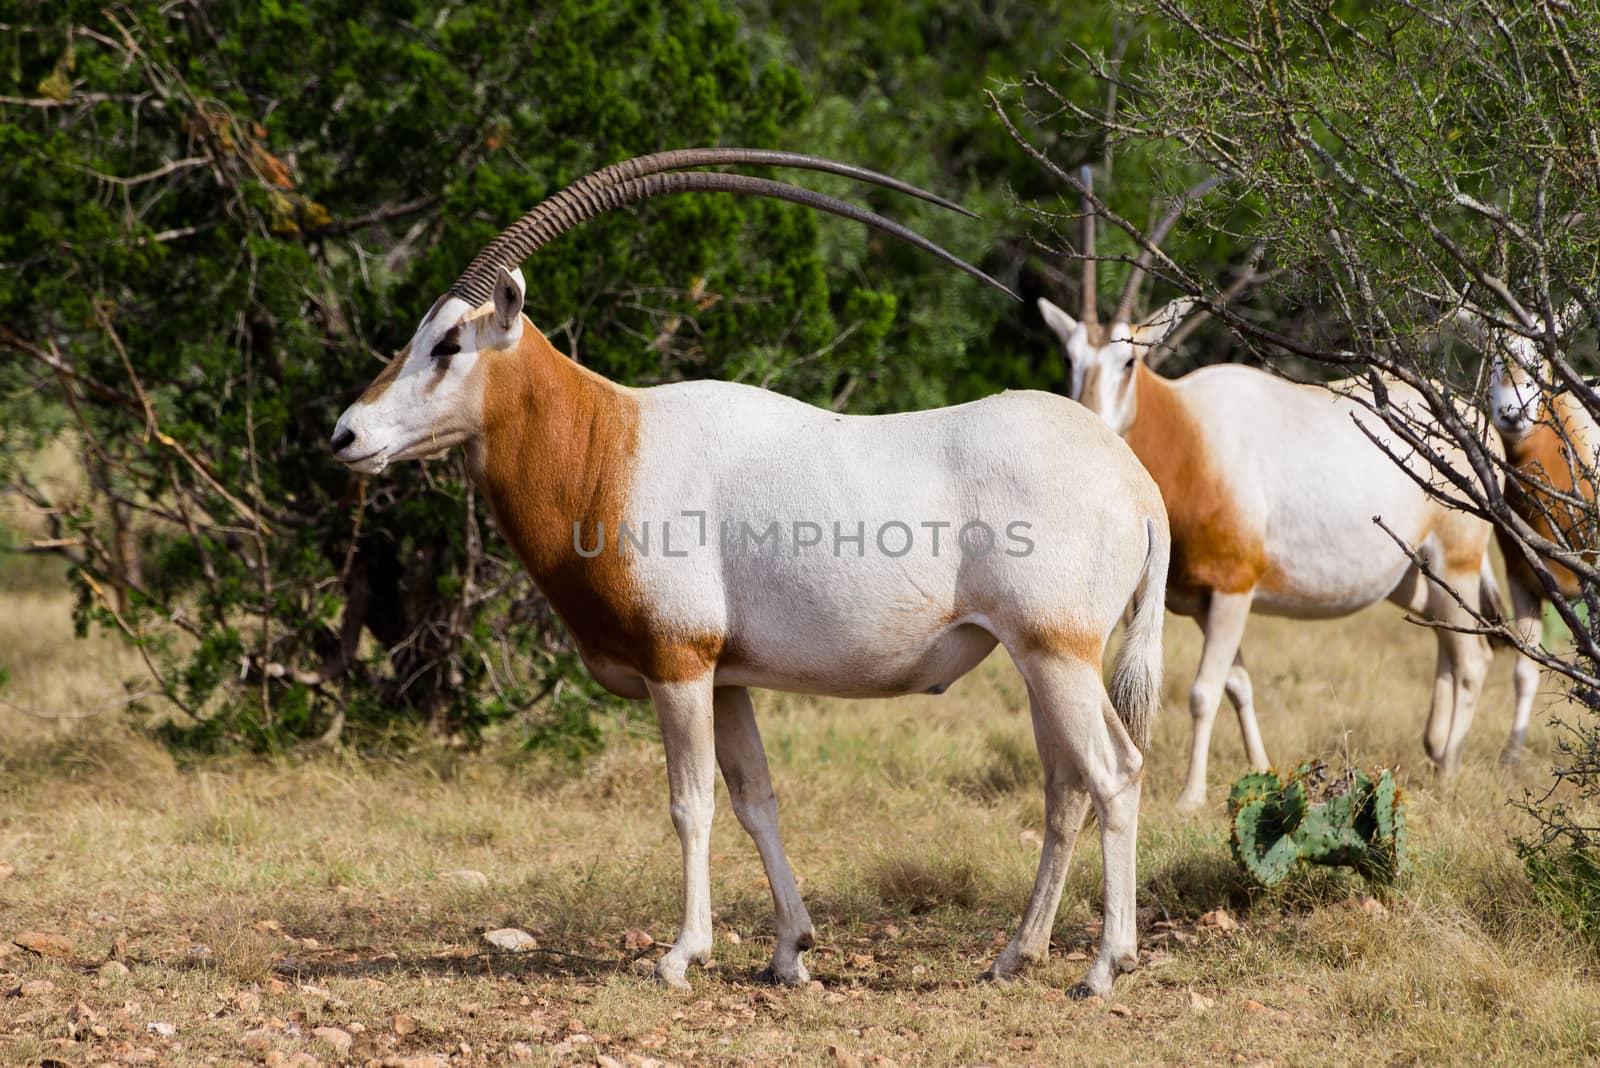 Wild Scimitar Horned Oryx Bull standing to the left. These animals are extinct in their native lands of Africa.